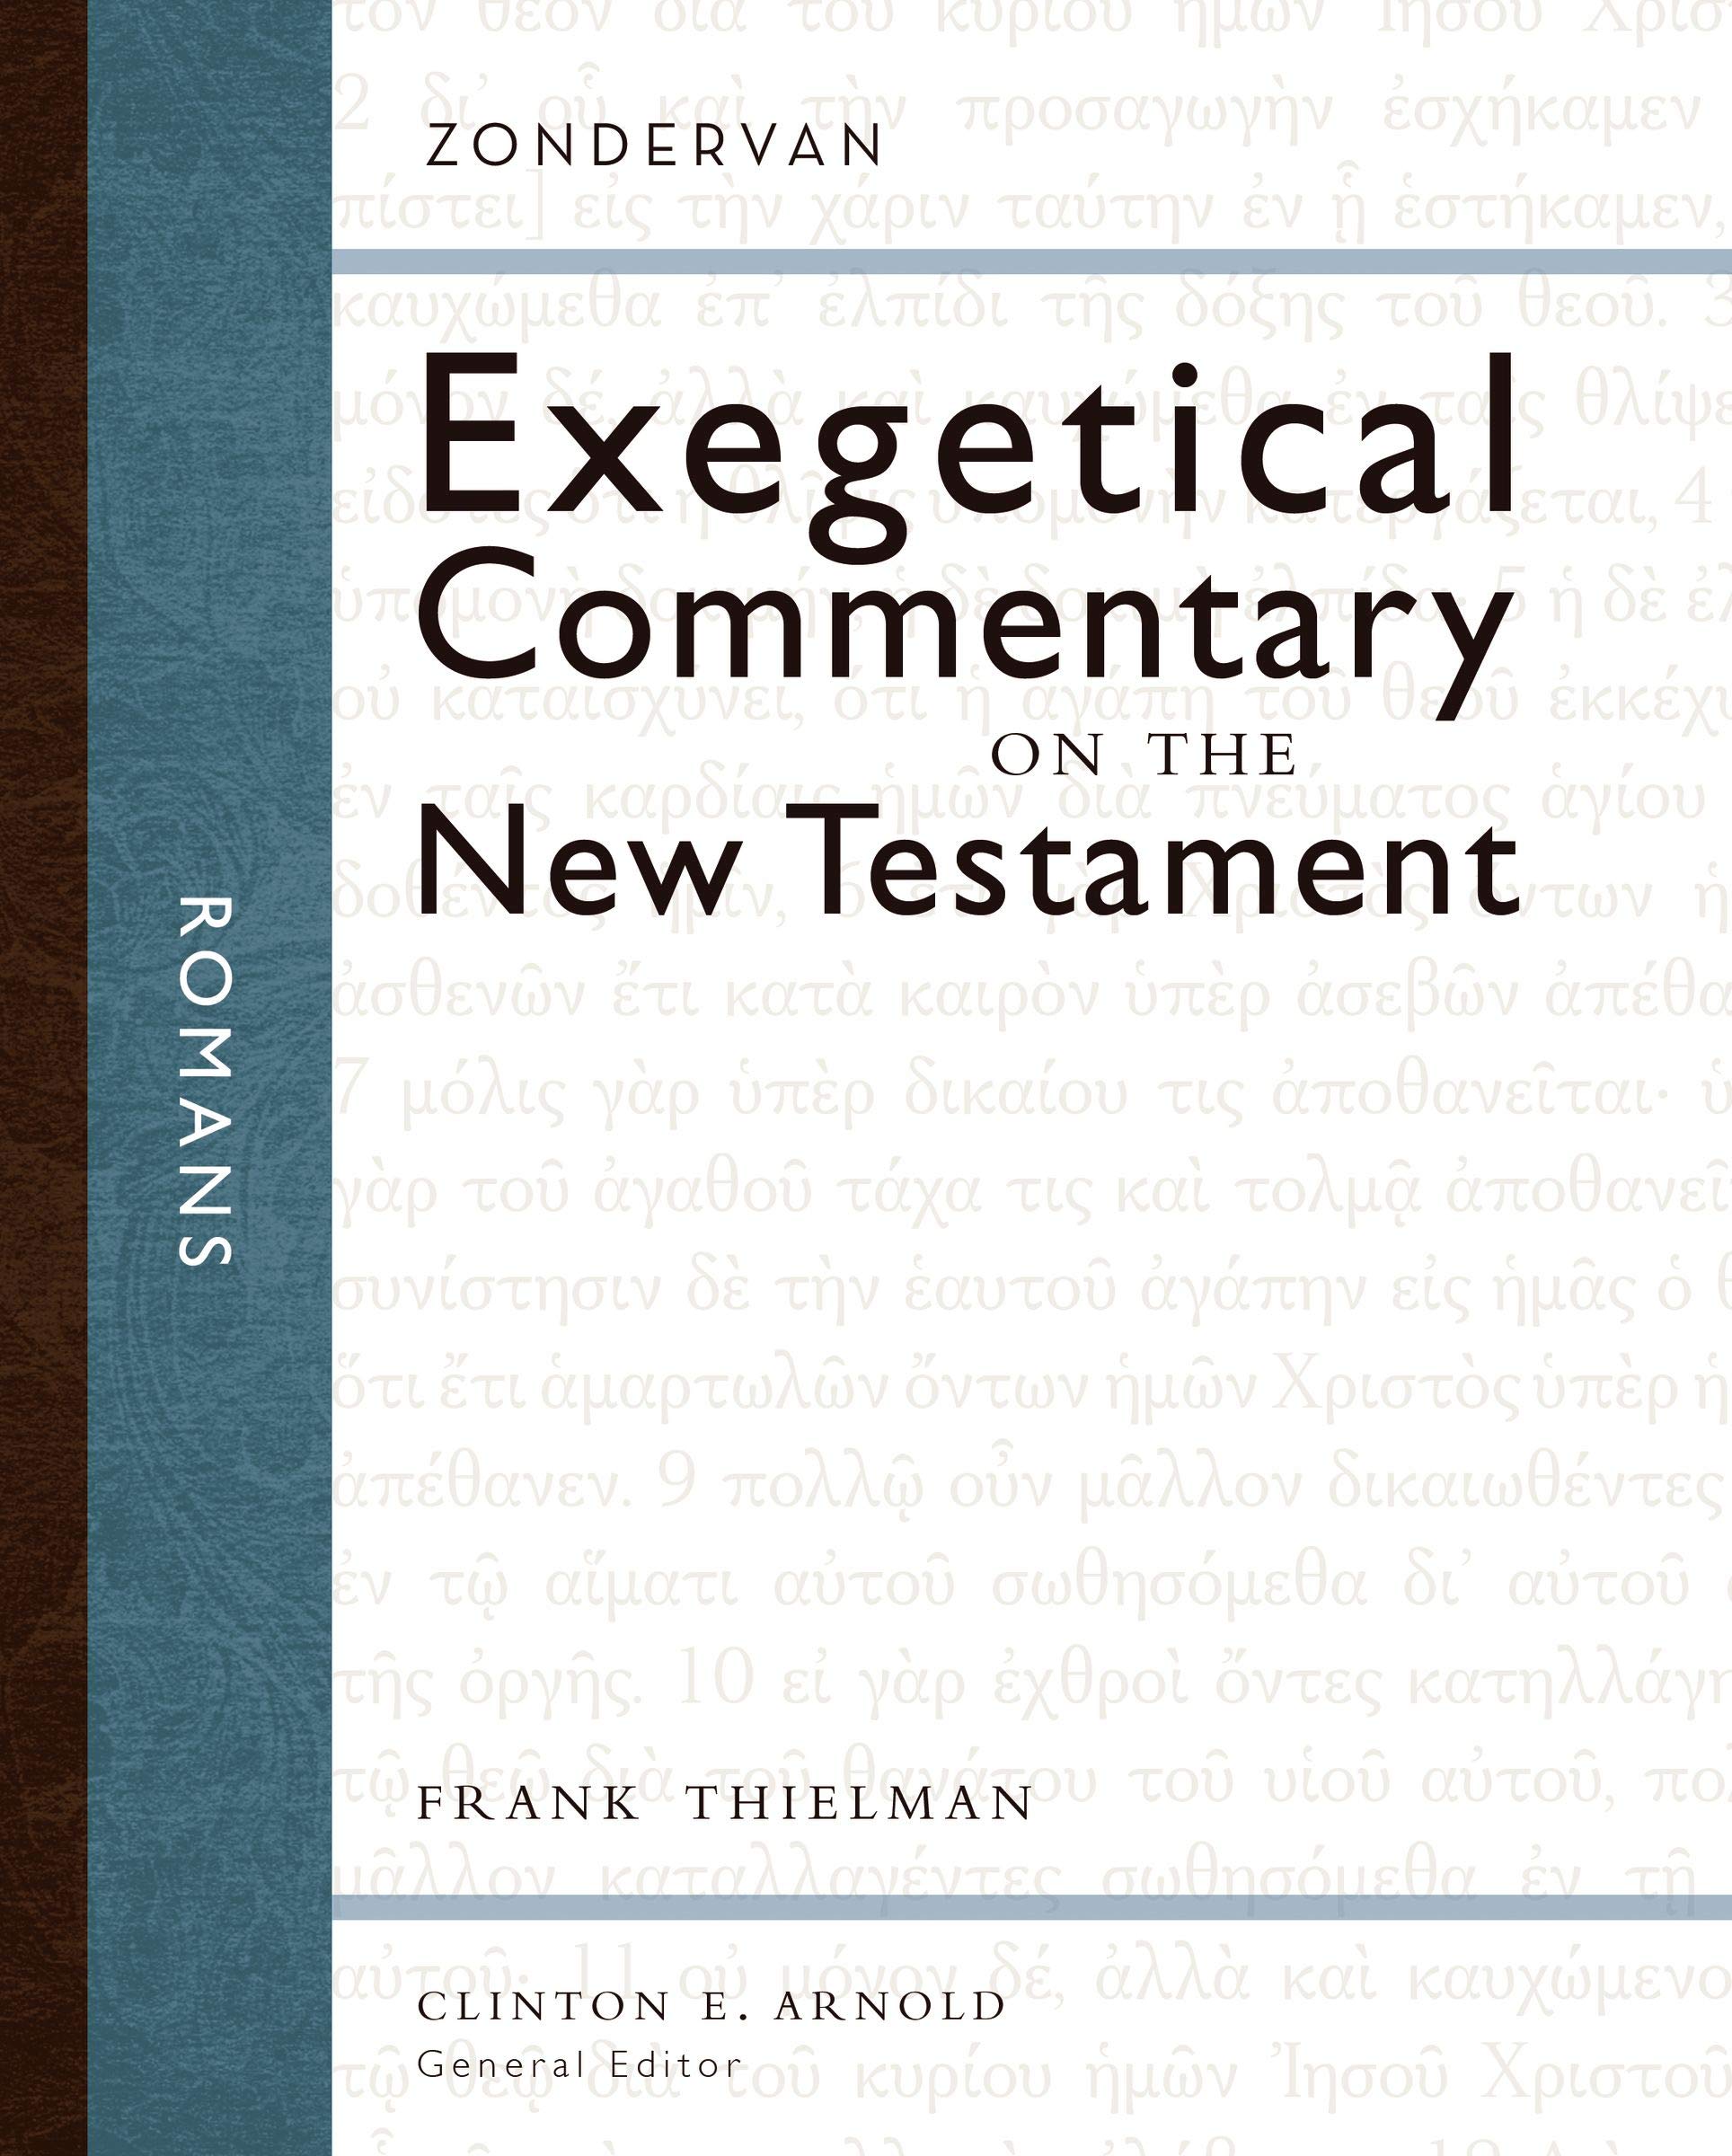 Book Notice: ROMANS (ZONDERVAN EXEGETICAL COMMENTARY ON THE NEW TESTAMENT), by Frank S. Thielman